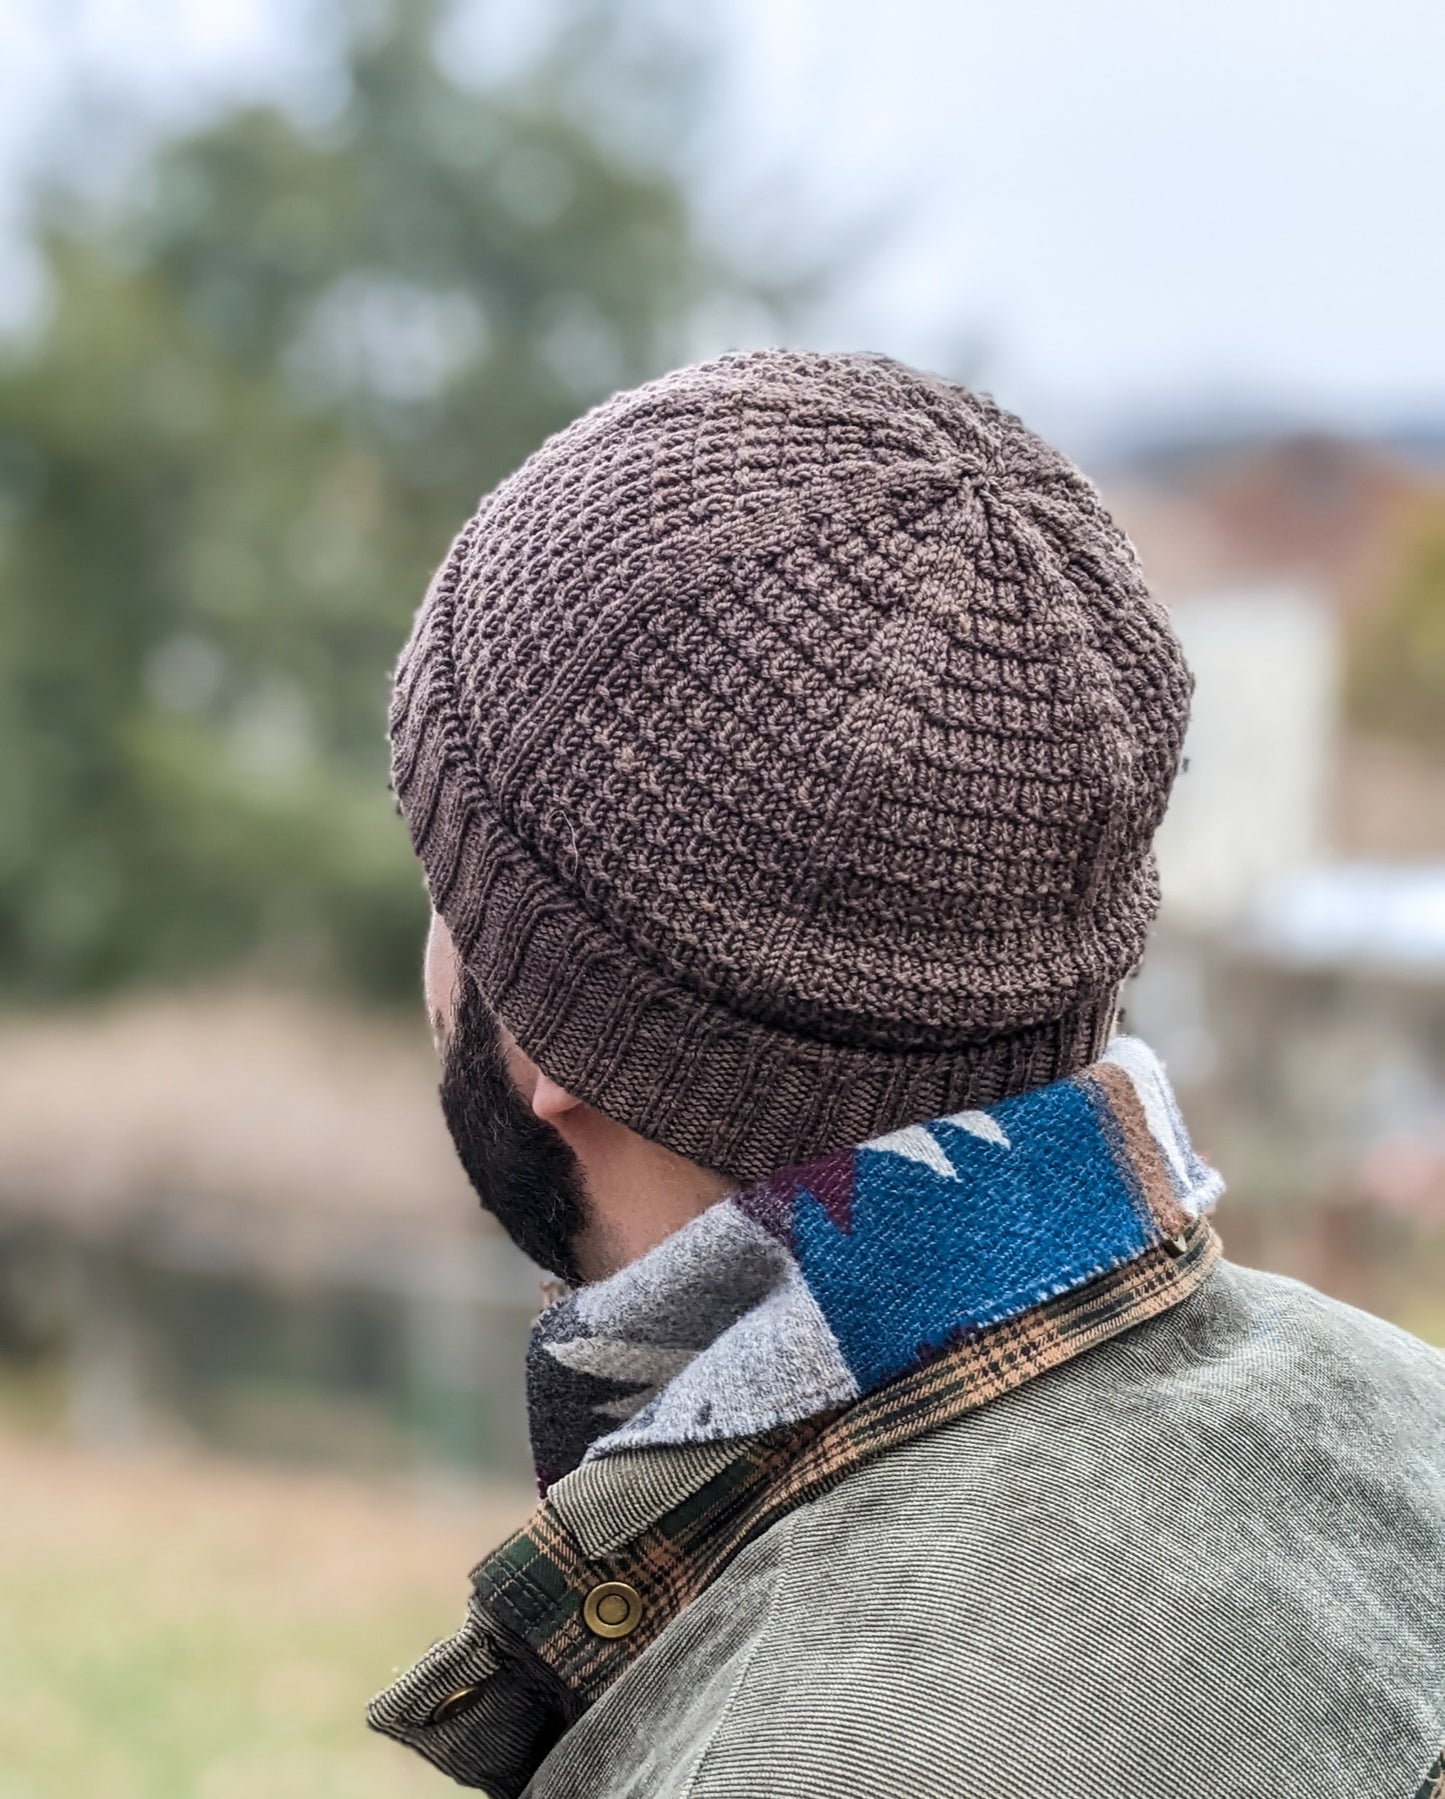 Seen from behind close up, Drew wears a brown knit beanie with a seed stitch design.